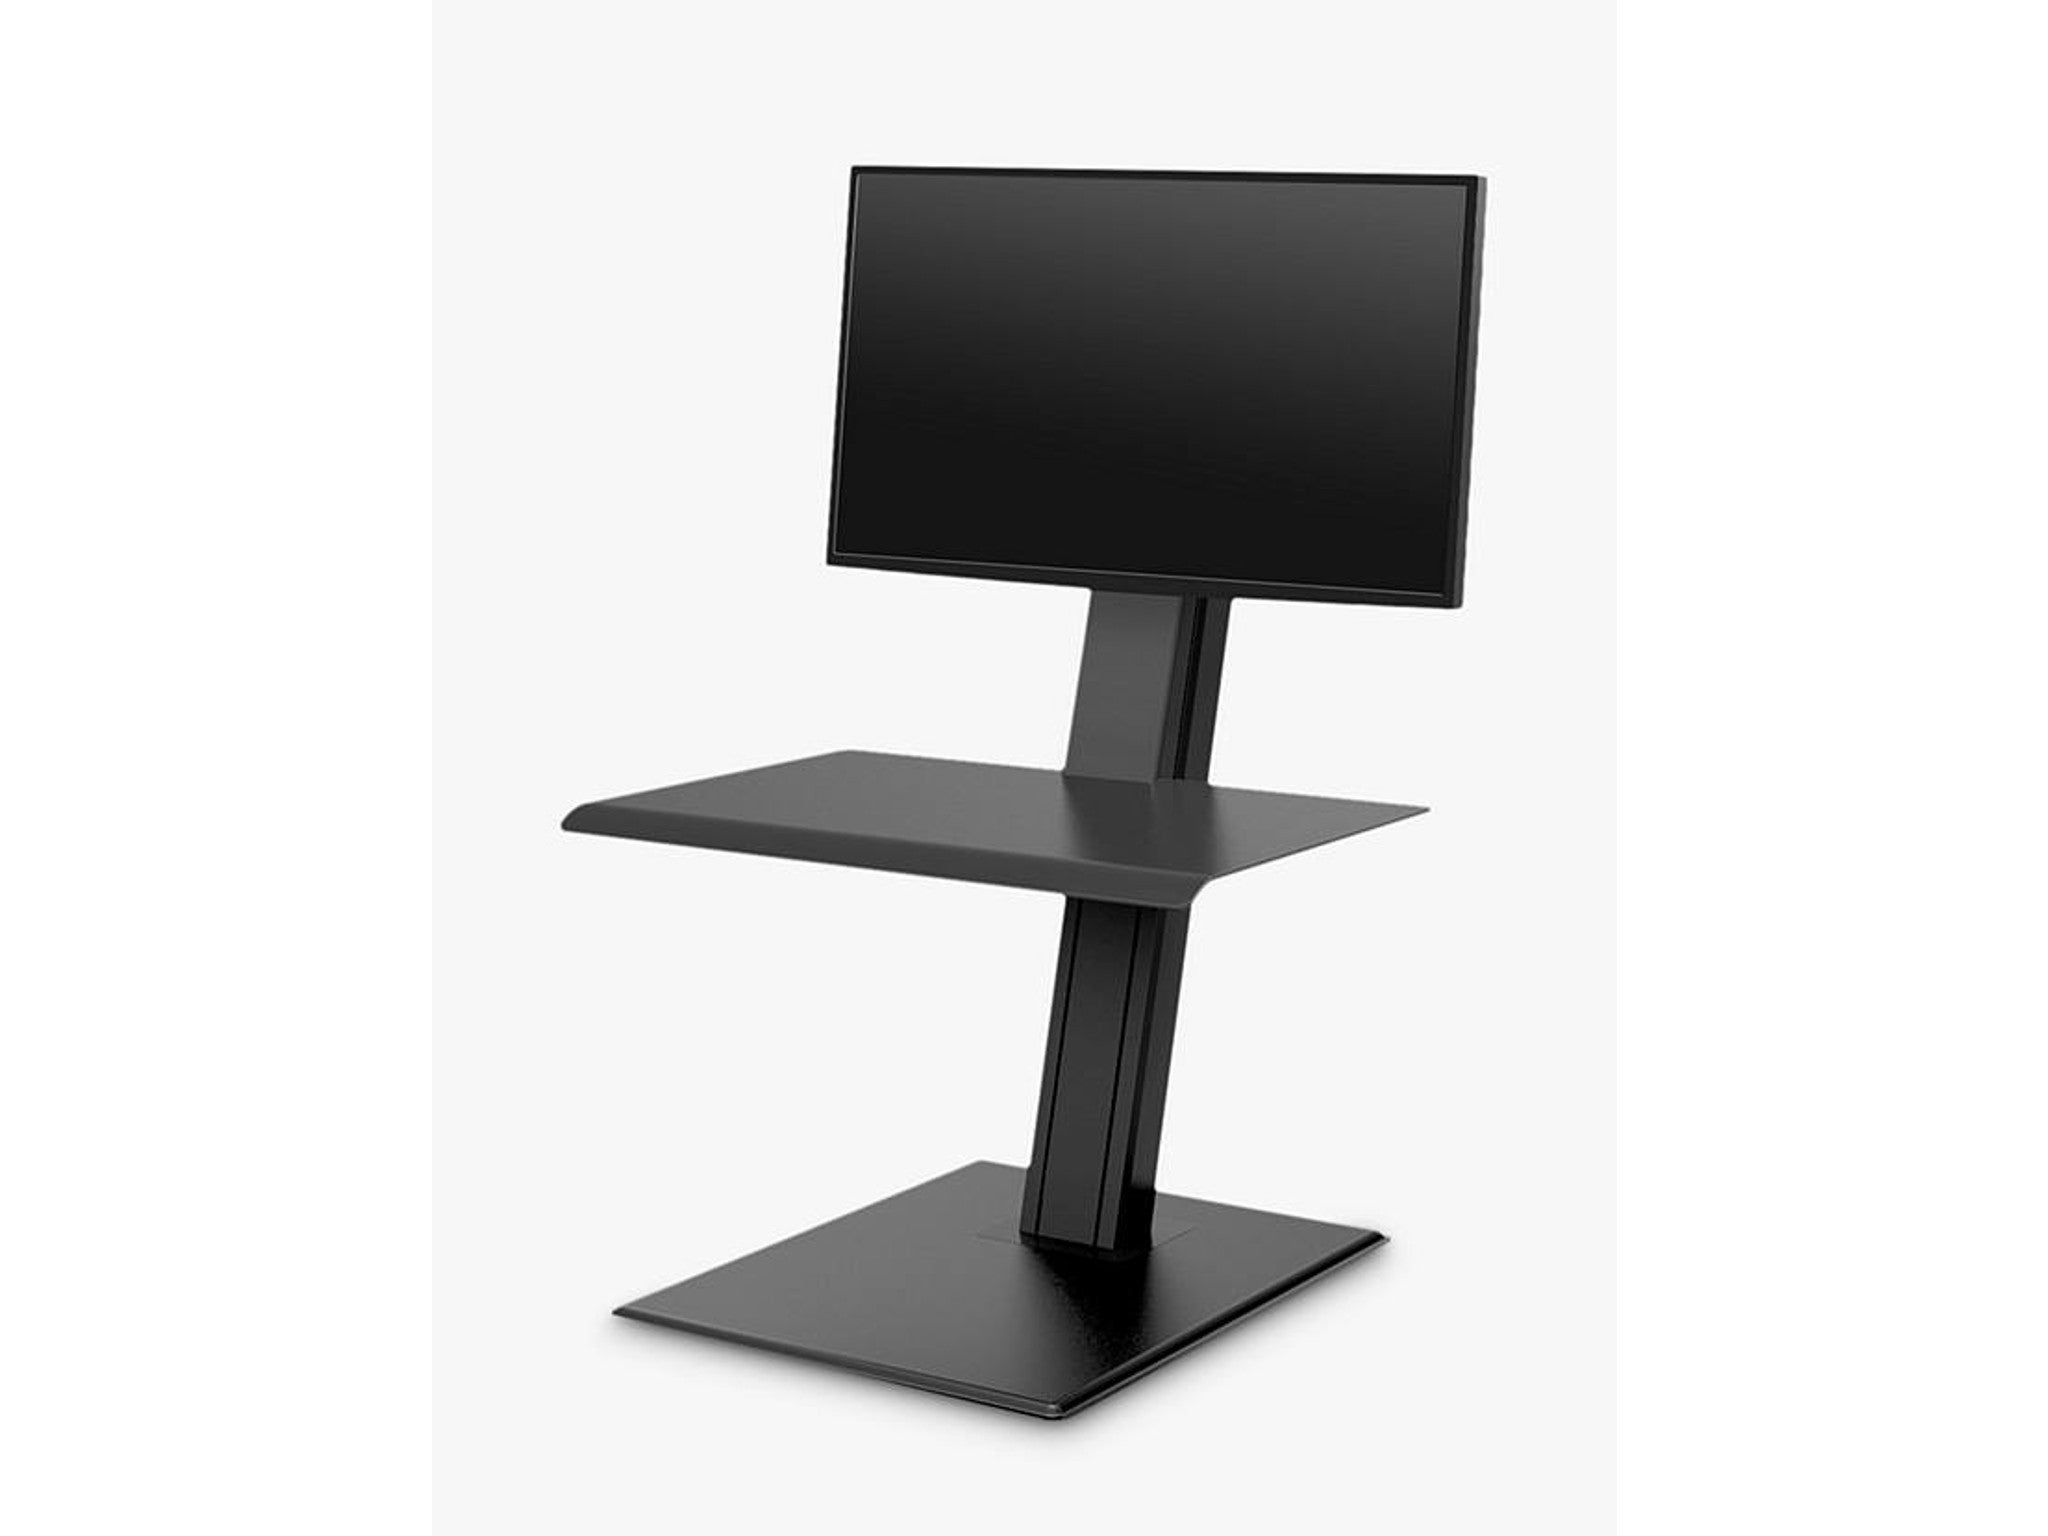 Humanscale QuickStand eco portable sit:stand single monitor workstation indybest.jpg